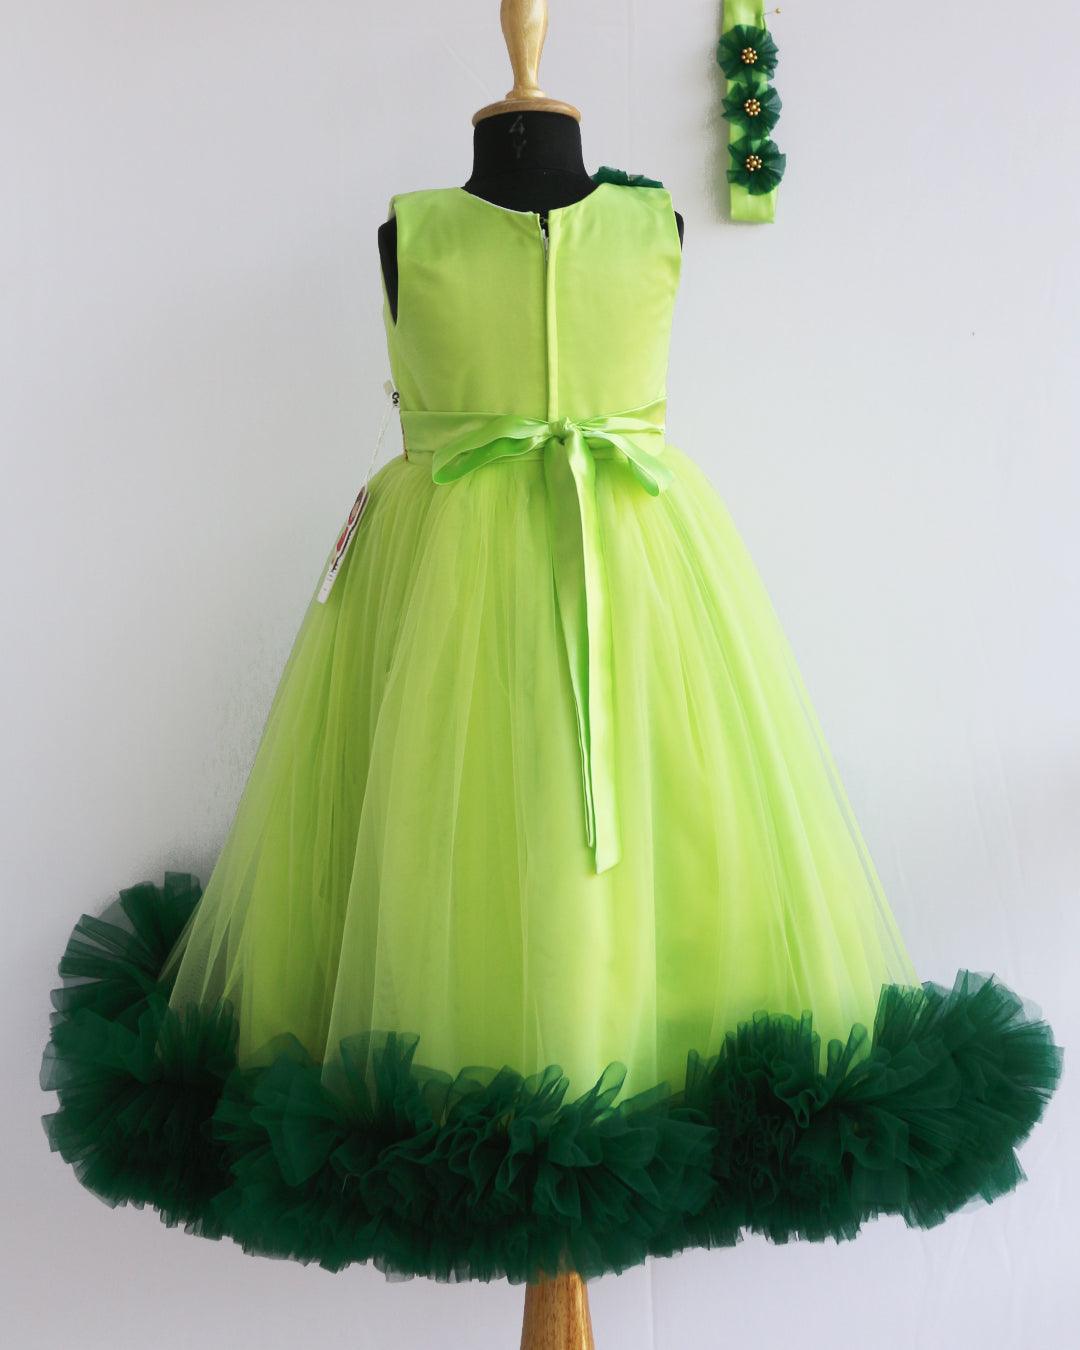 Light Green Pleated Ruffles Gown- Matching Hairband
Material : Light green mono nylon net fabric with bottle green net ruffles on the end portion. Yoke portion is designed in a pleated pattern. Center portion has a g